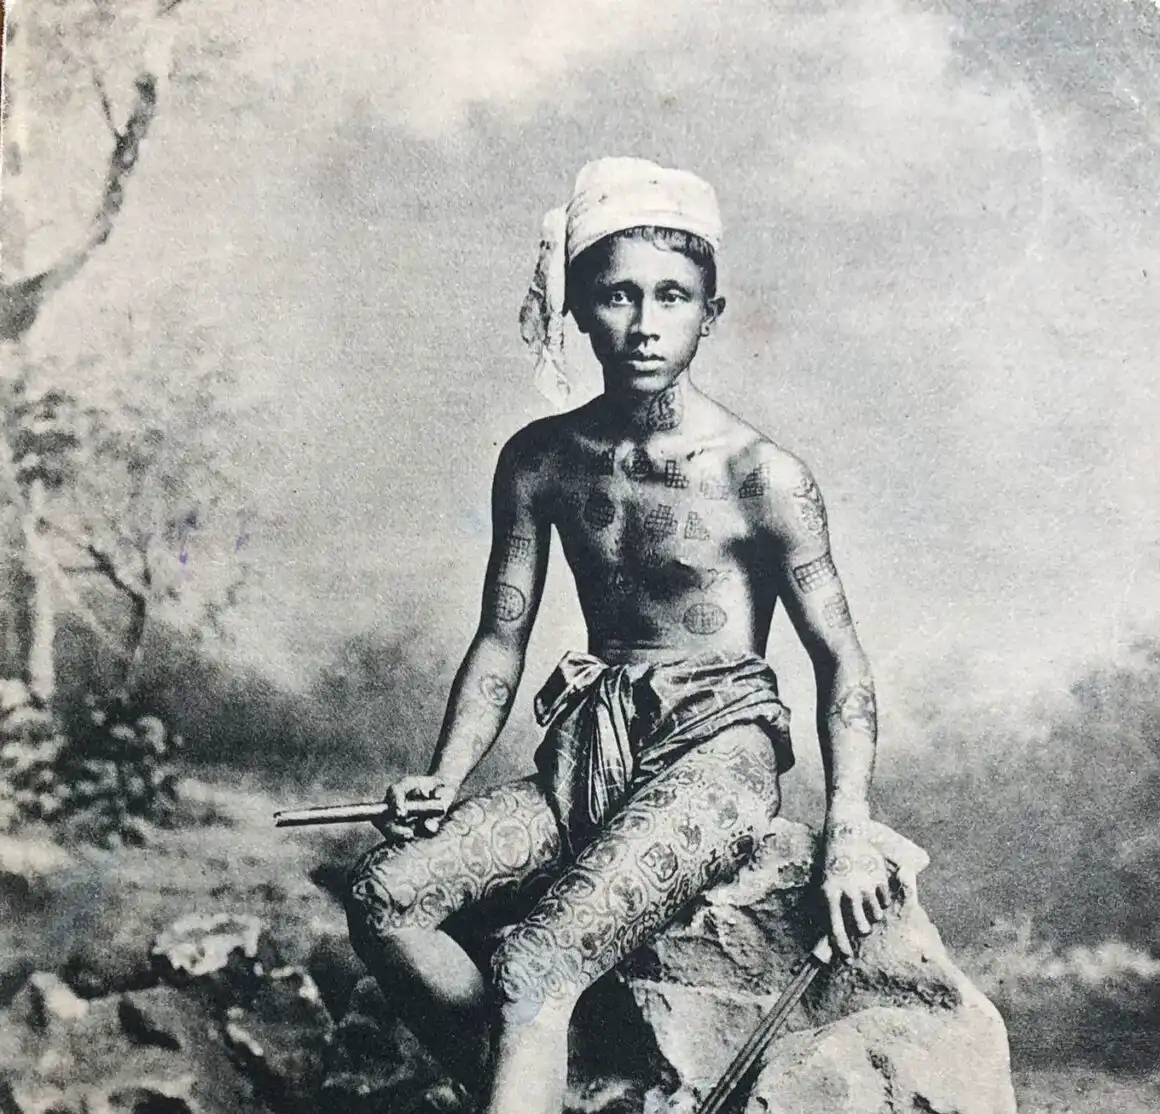 Photo postcard displacing tattooed Burmese villager, first decade of XIX century, from the private collection of Gabriele Gori